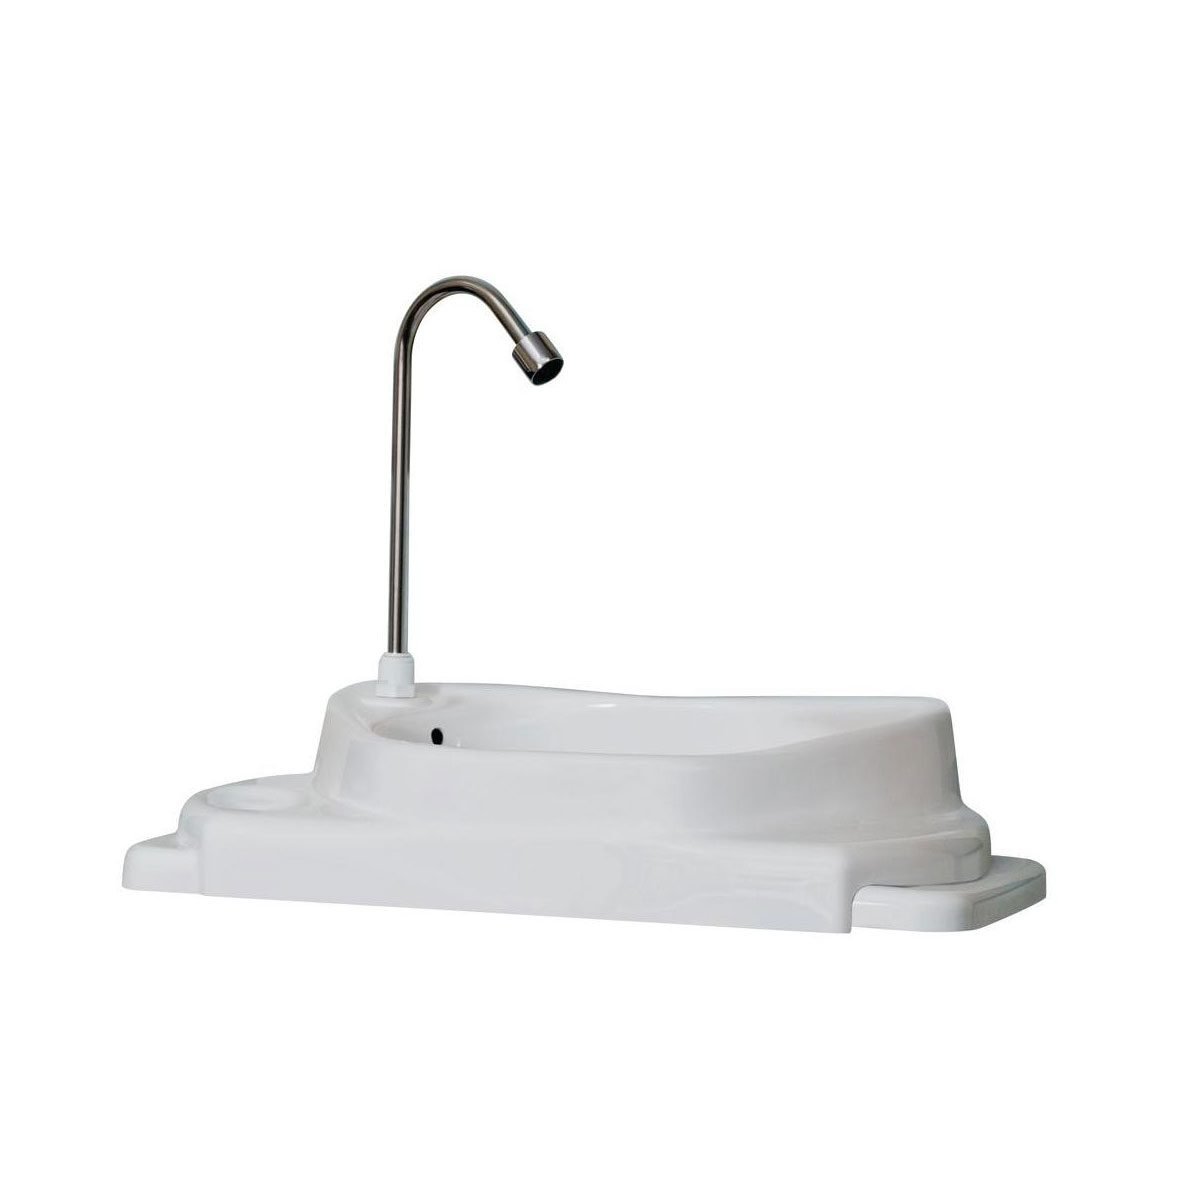 Over Toilet Sink White Sinkpositive Toilet Tank Covers Hd214 01 64 1000